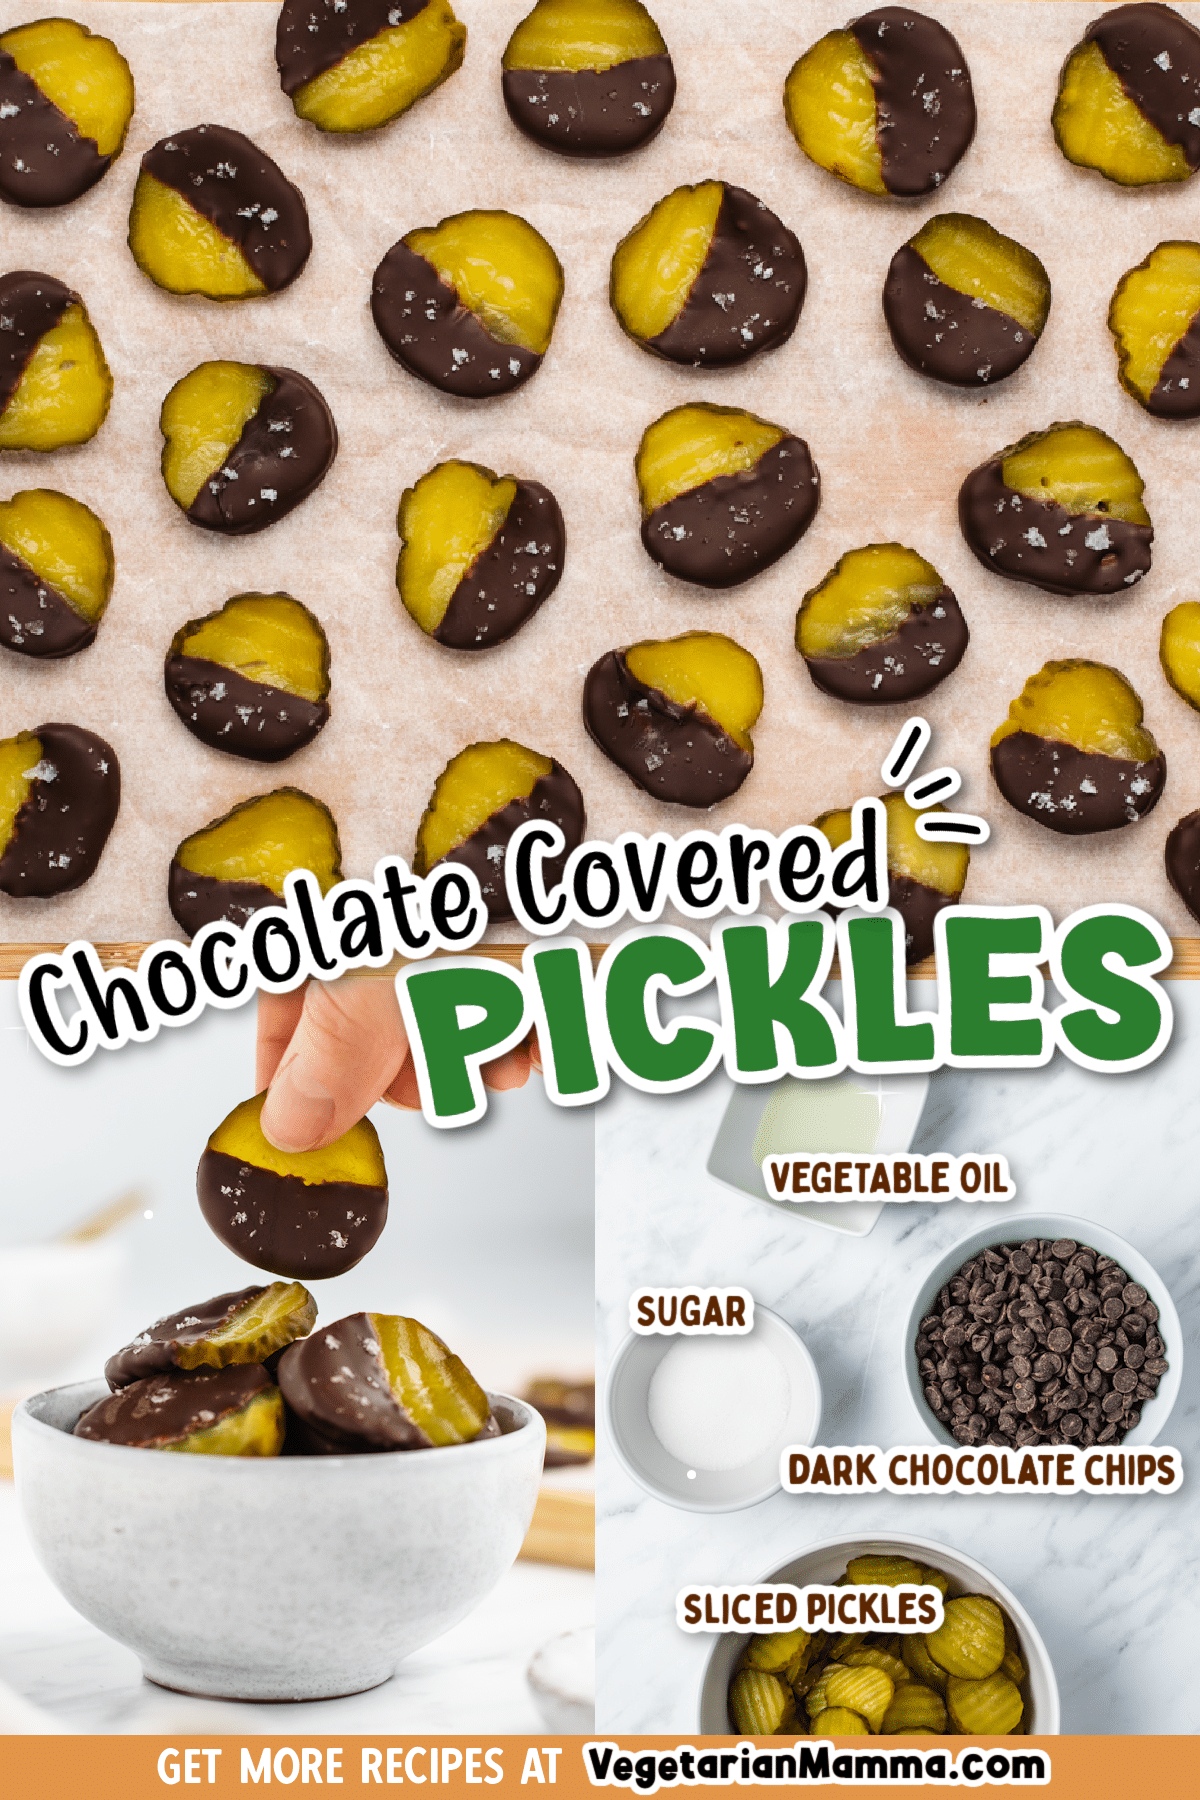 Chocolate Covered Pickles are a unique food combination that is oddly so delicious. This unusual sweet and salty combo will become your new obsession.  | pickles | chocolate | chocolate covered | vegan snack | sweet and salty